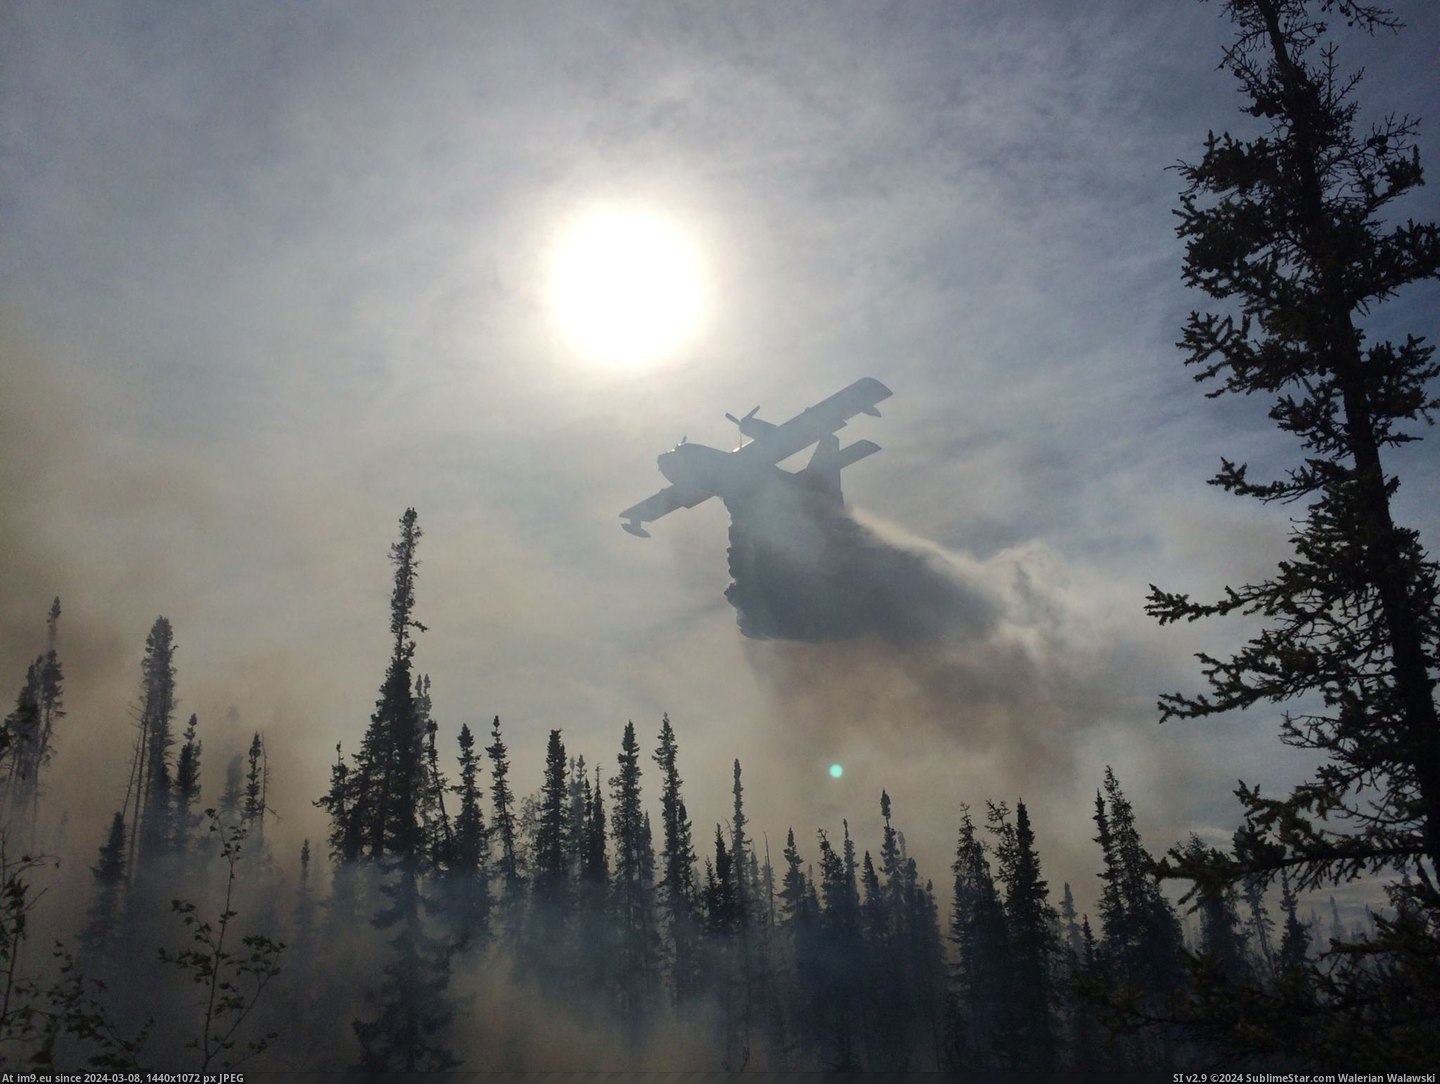 #Fire #Fighting #Fairbanks #Cousin [Pics] My cousin took this while fighting a fire outside of Fairbanks, AK Pic. (Изображение из альбом My r/PICS favs))